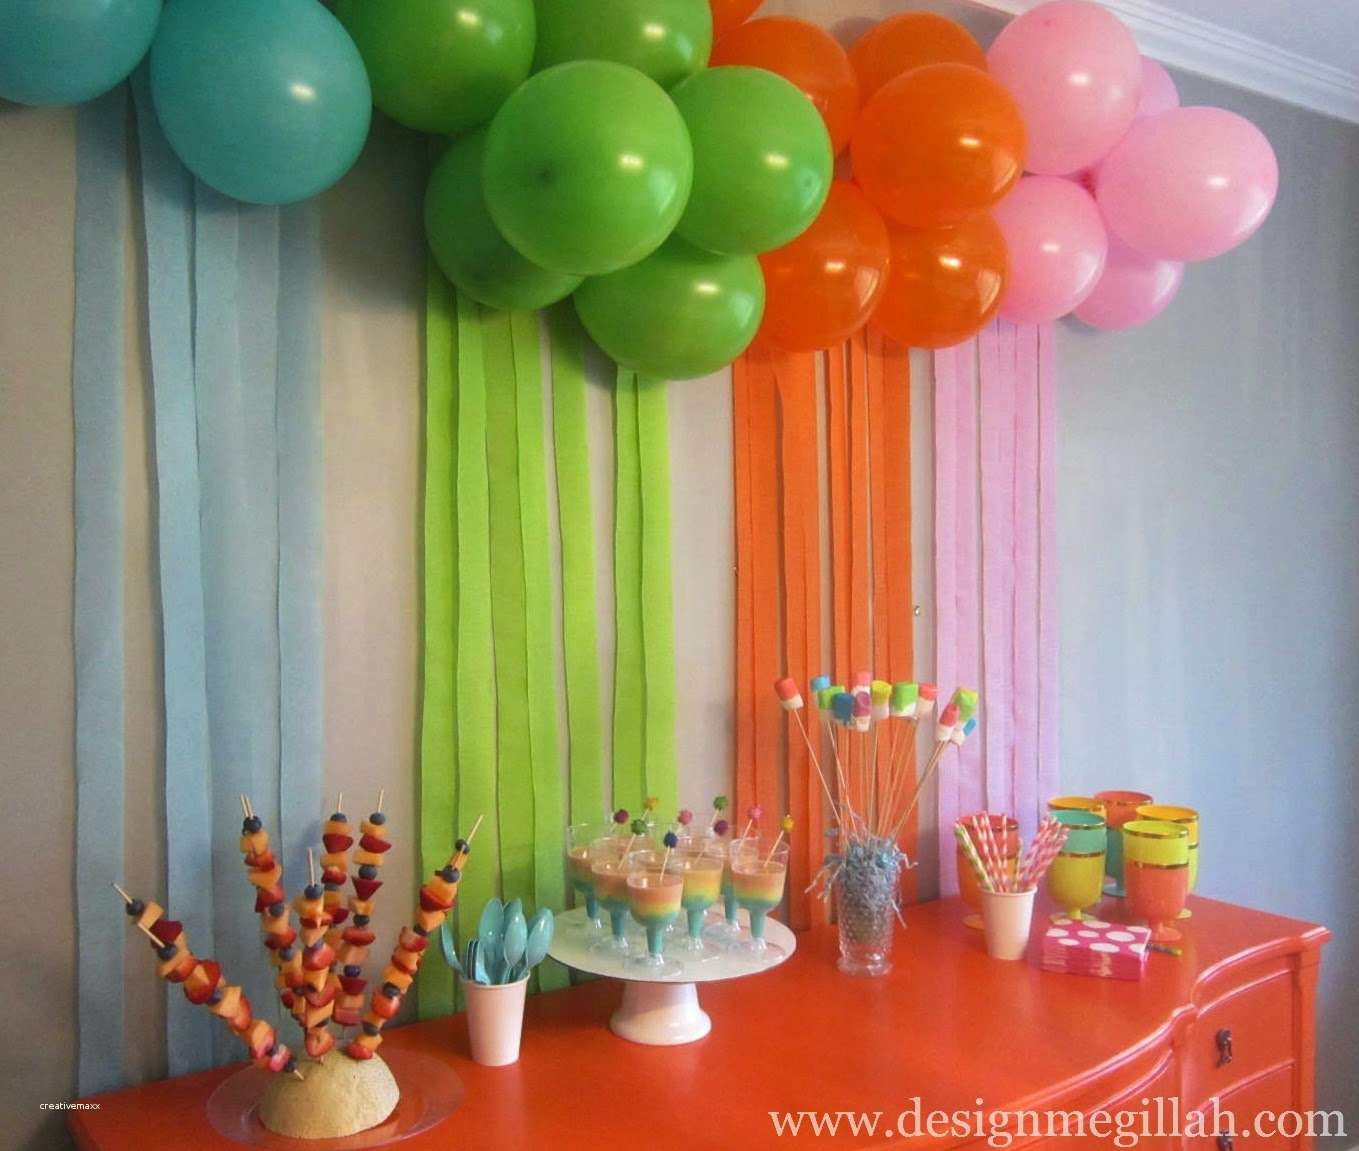 How To Decorate Birthday Party At Home
 Awesome 1st Birthday Party Simple Decorations at Home